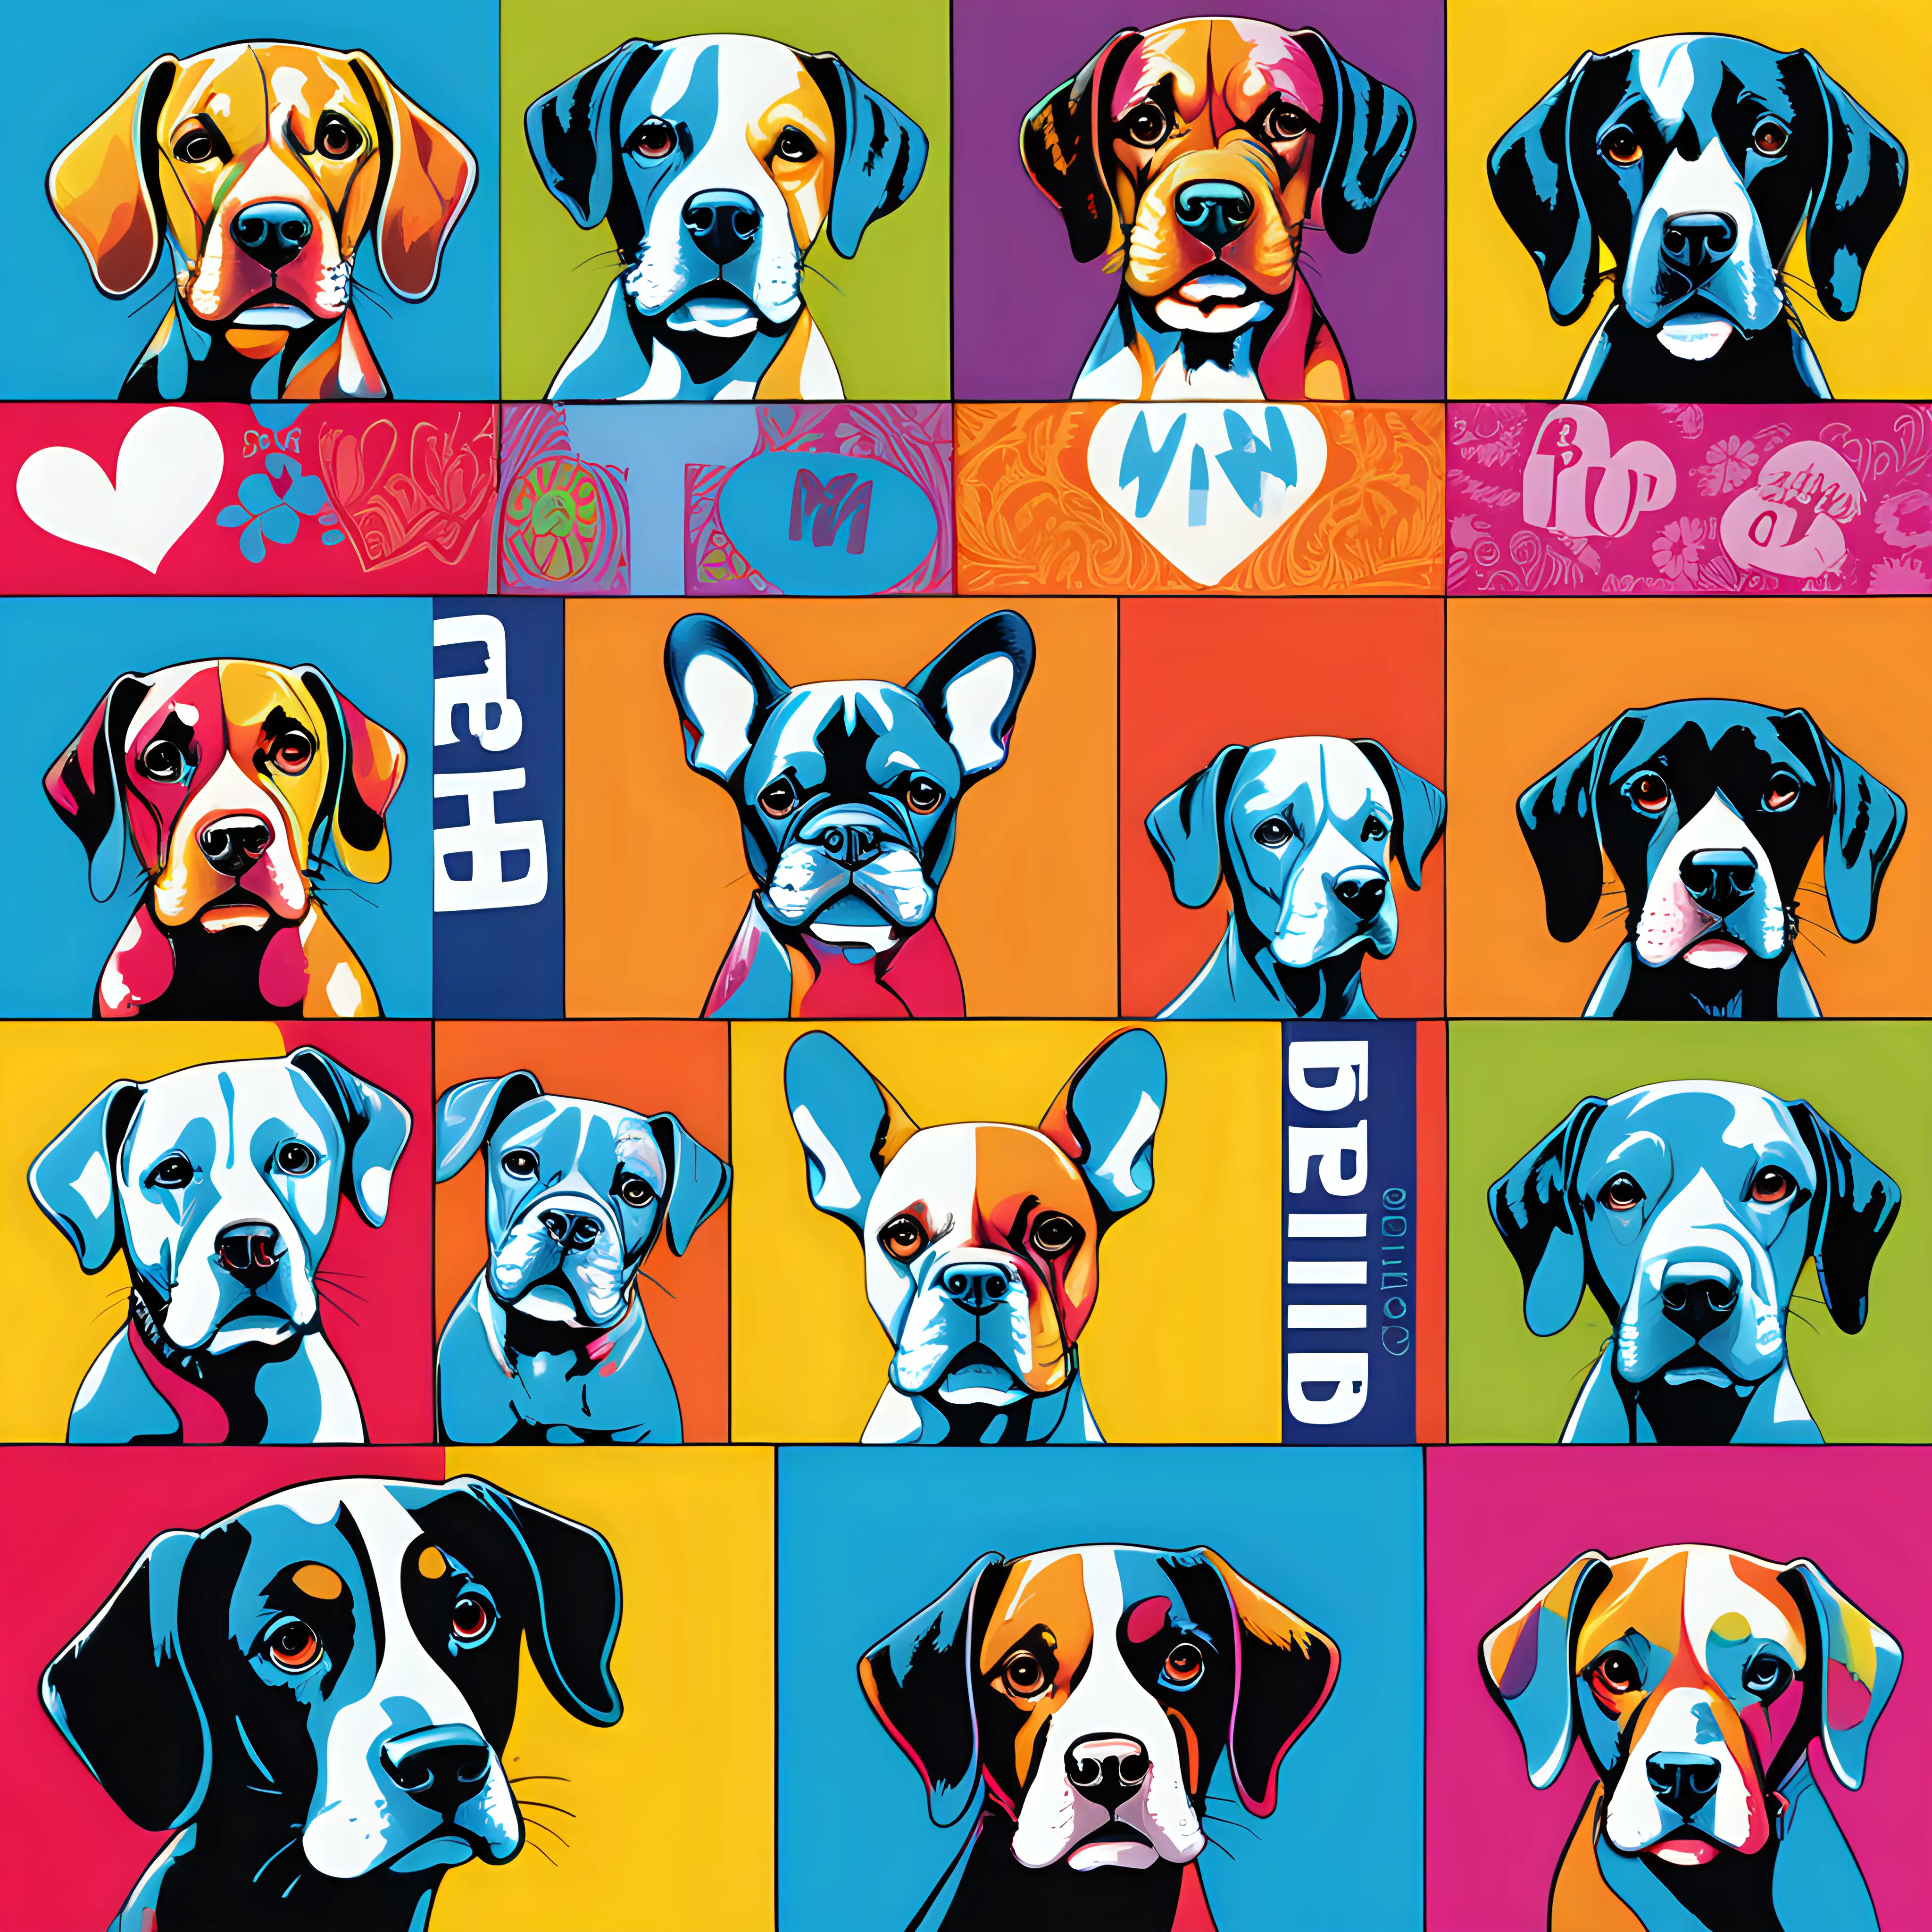 Generate a lively and imaginative series of pop art portraits inspired by the iconic Beatles album cover. Replace the original band members with whimsical depictions of various dog breeds, each exuding its unique charm and personality. Embrace the bold and vibrant color palette typical of pop art, incorporating dynamic shapes and patterns. Ensure that the composition retains the playful and energetic spirit of the original artwork, making it a delightful fusion of canine charm and musical nostalgia